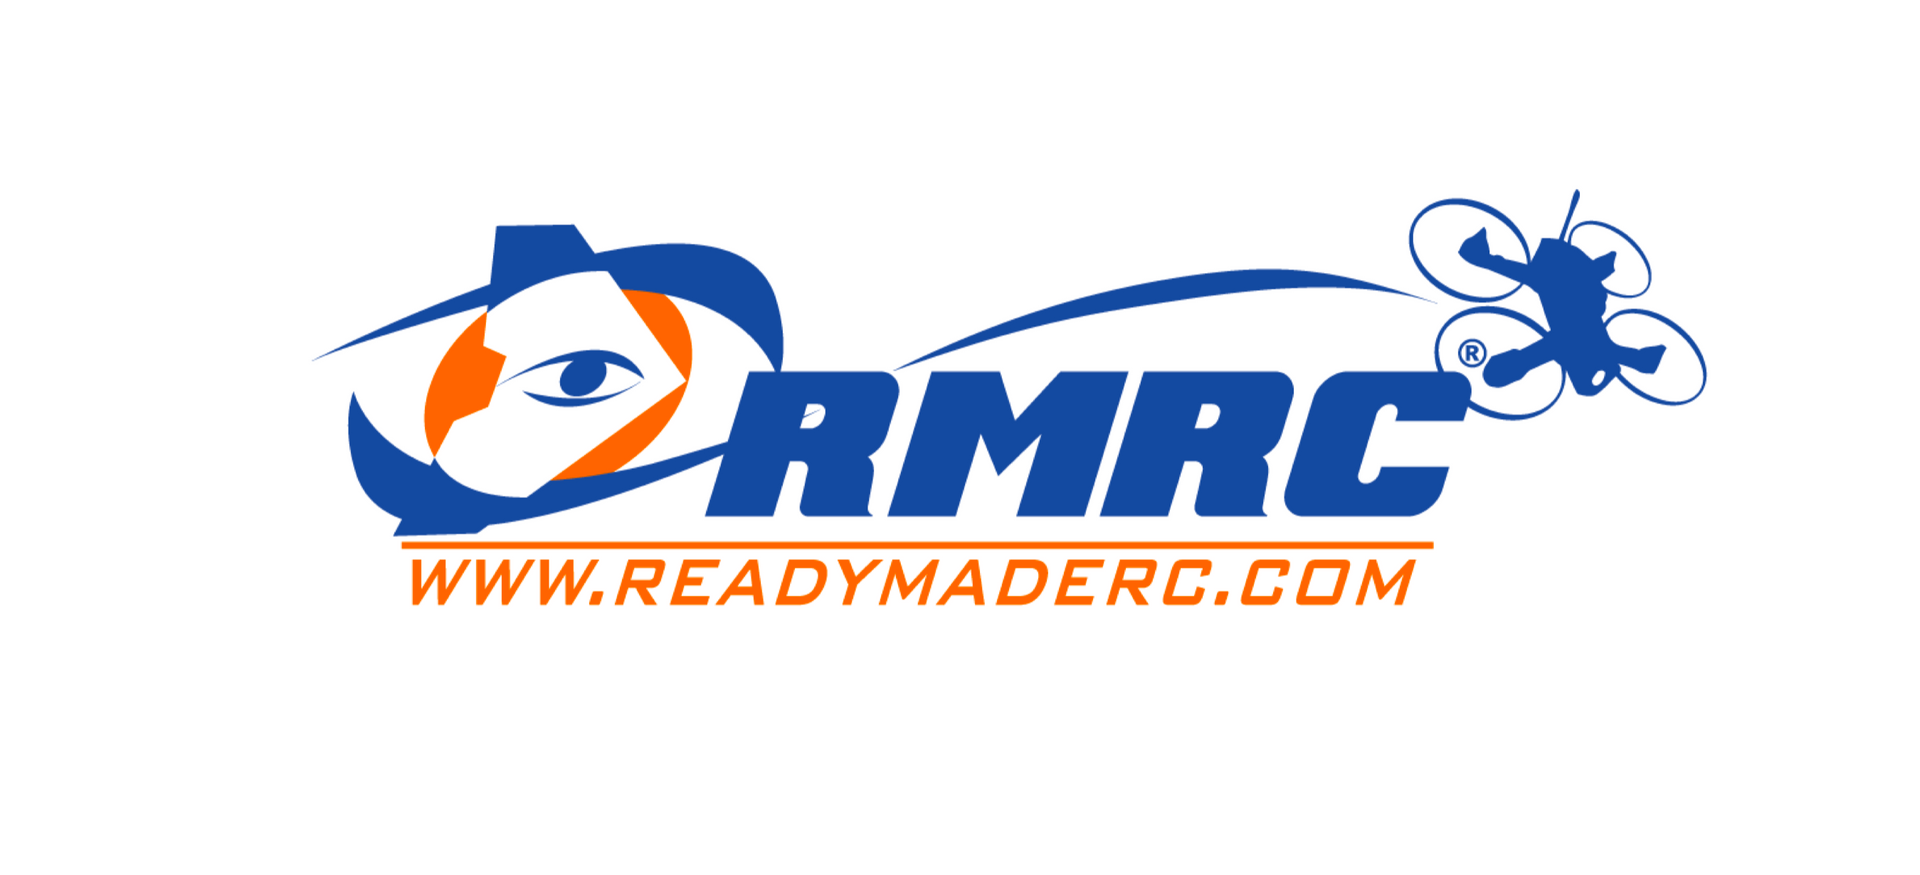 Ready Made RC